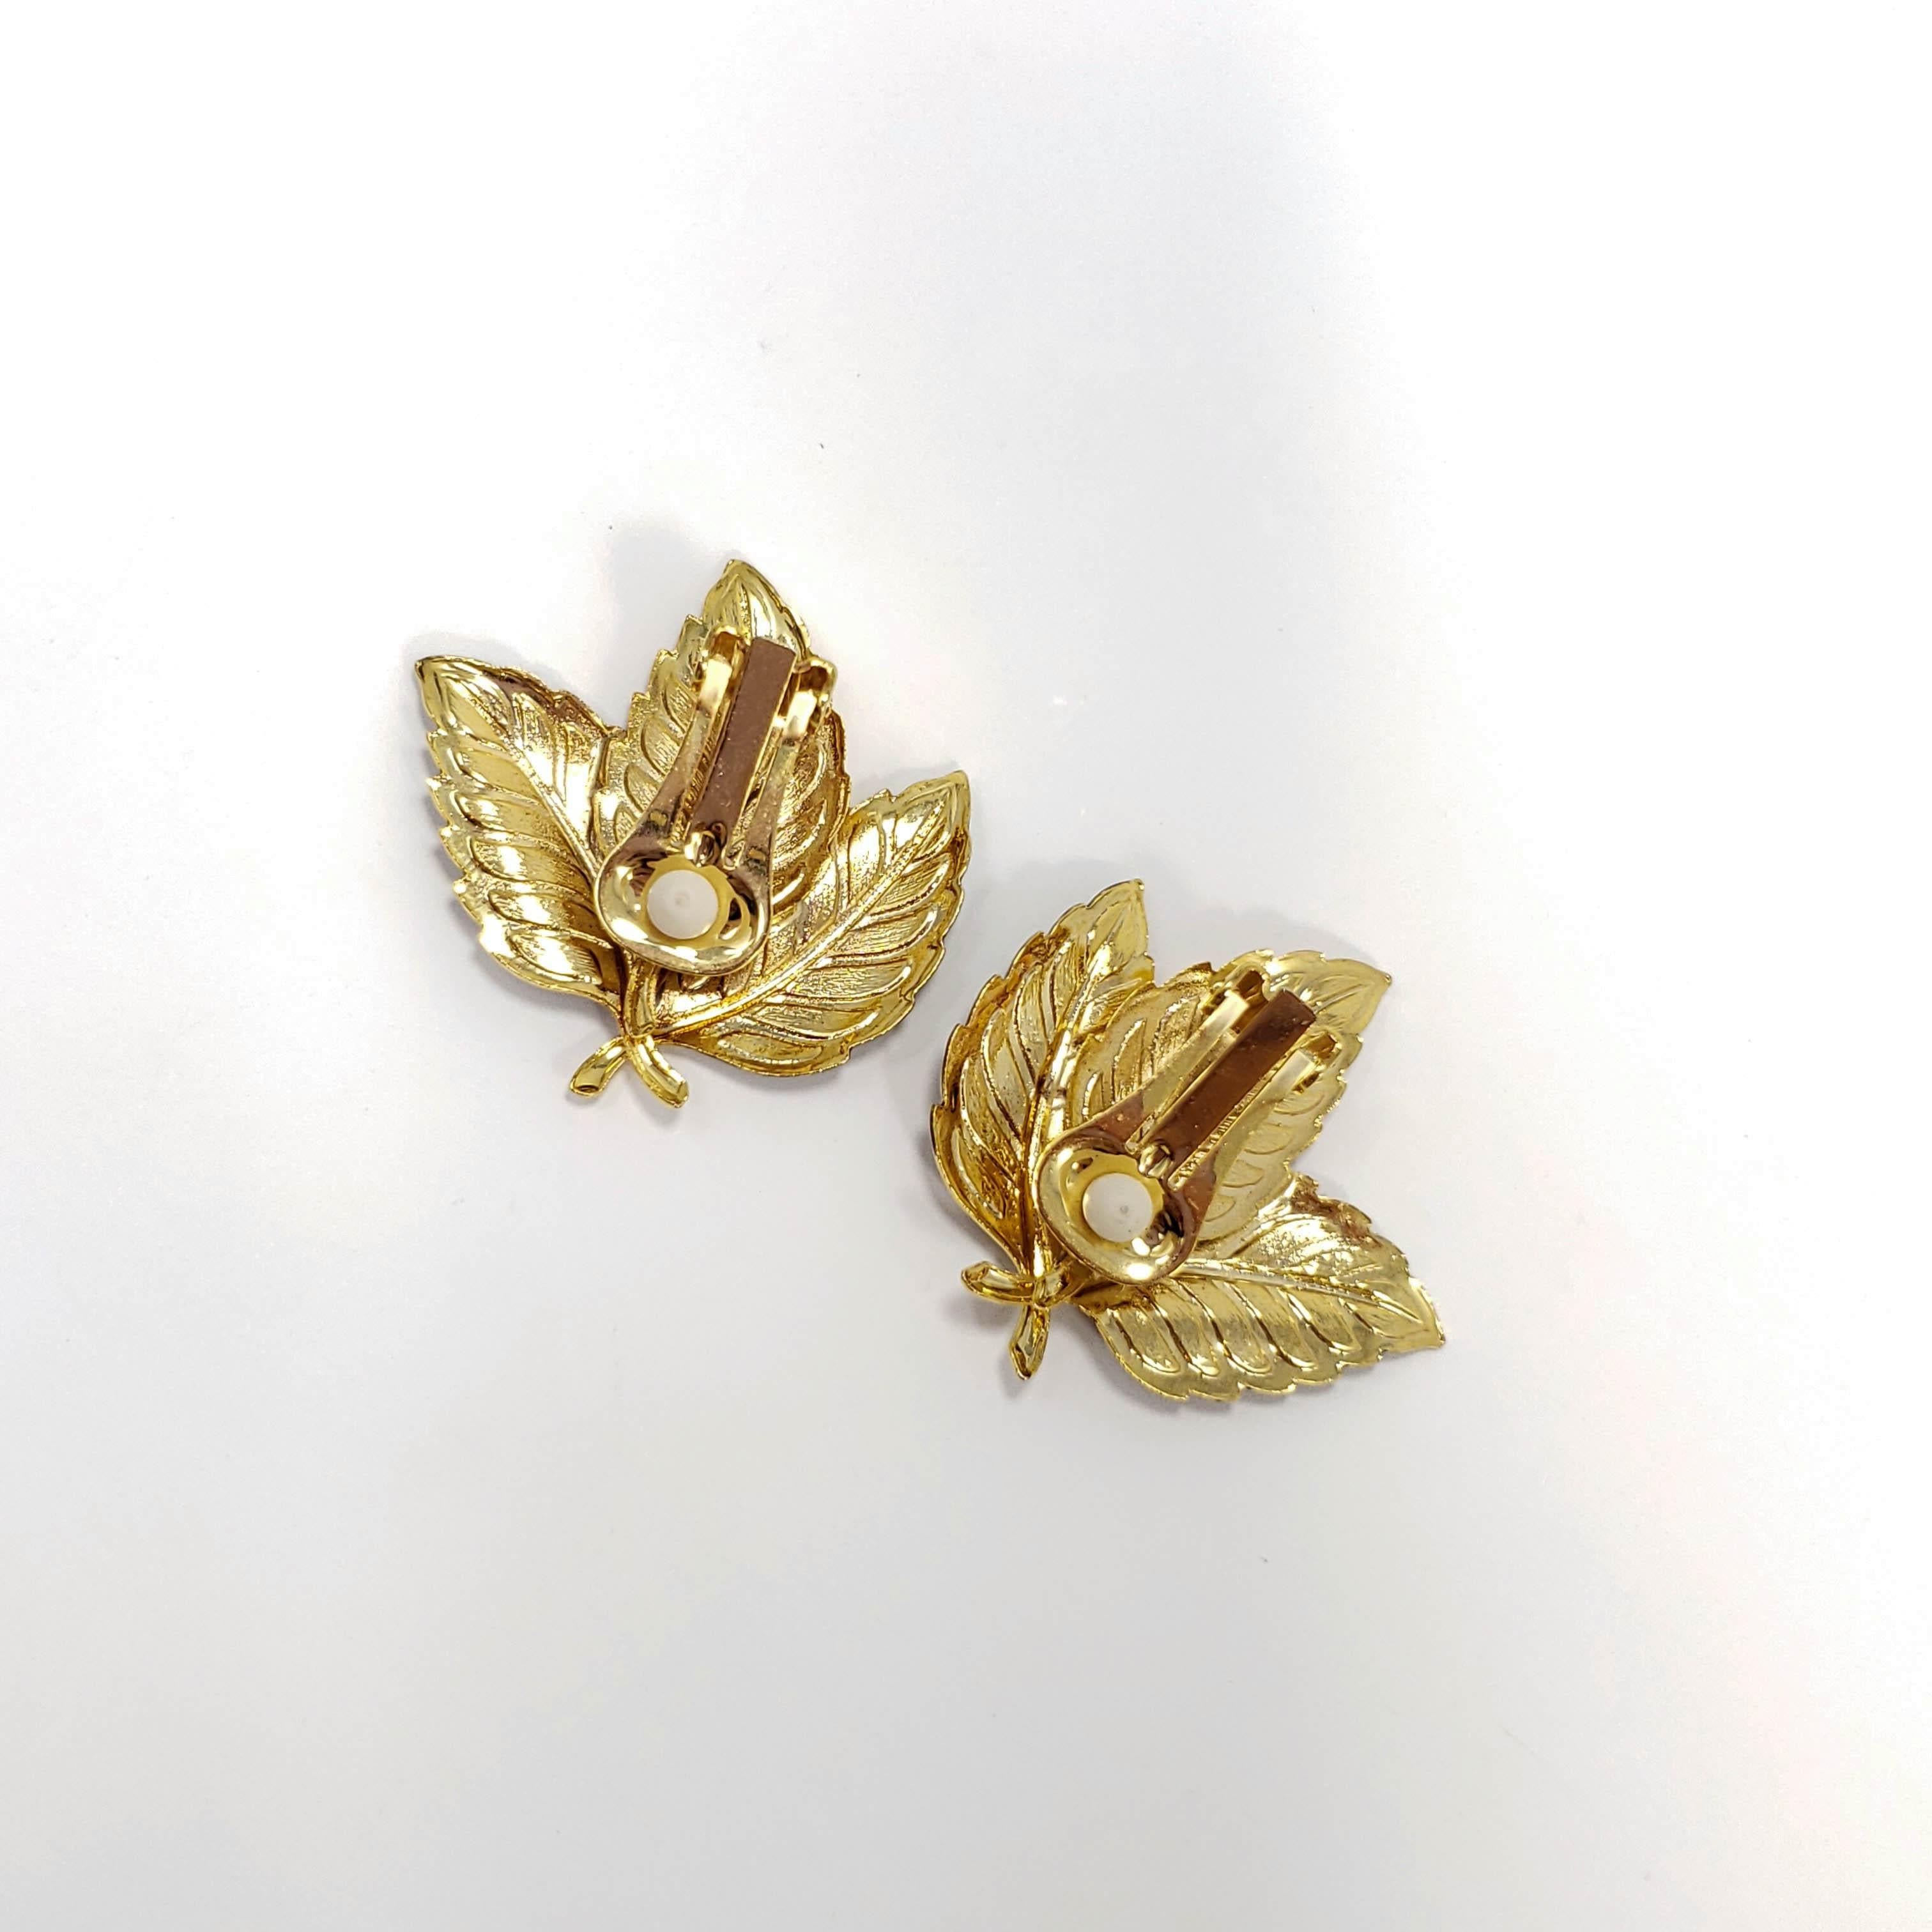 Painted Three Leaf Clip on Earrings in Gold, Green, and Brown. Vintage, Mid 1900 In Good Condition For Sale In Milford, DE